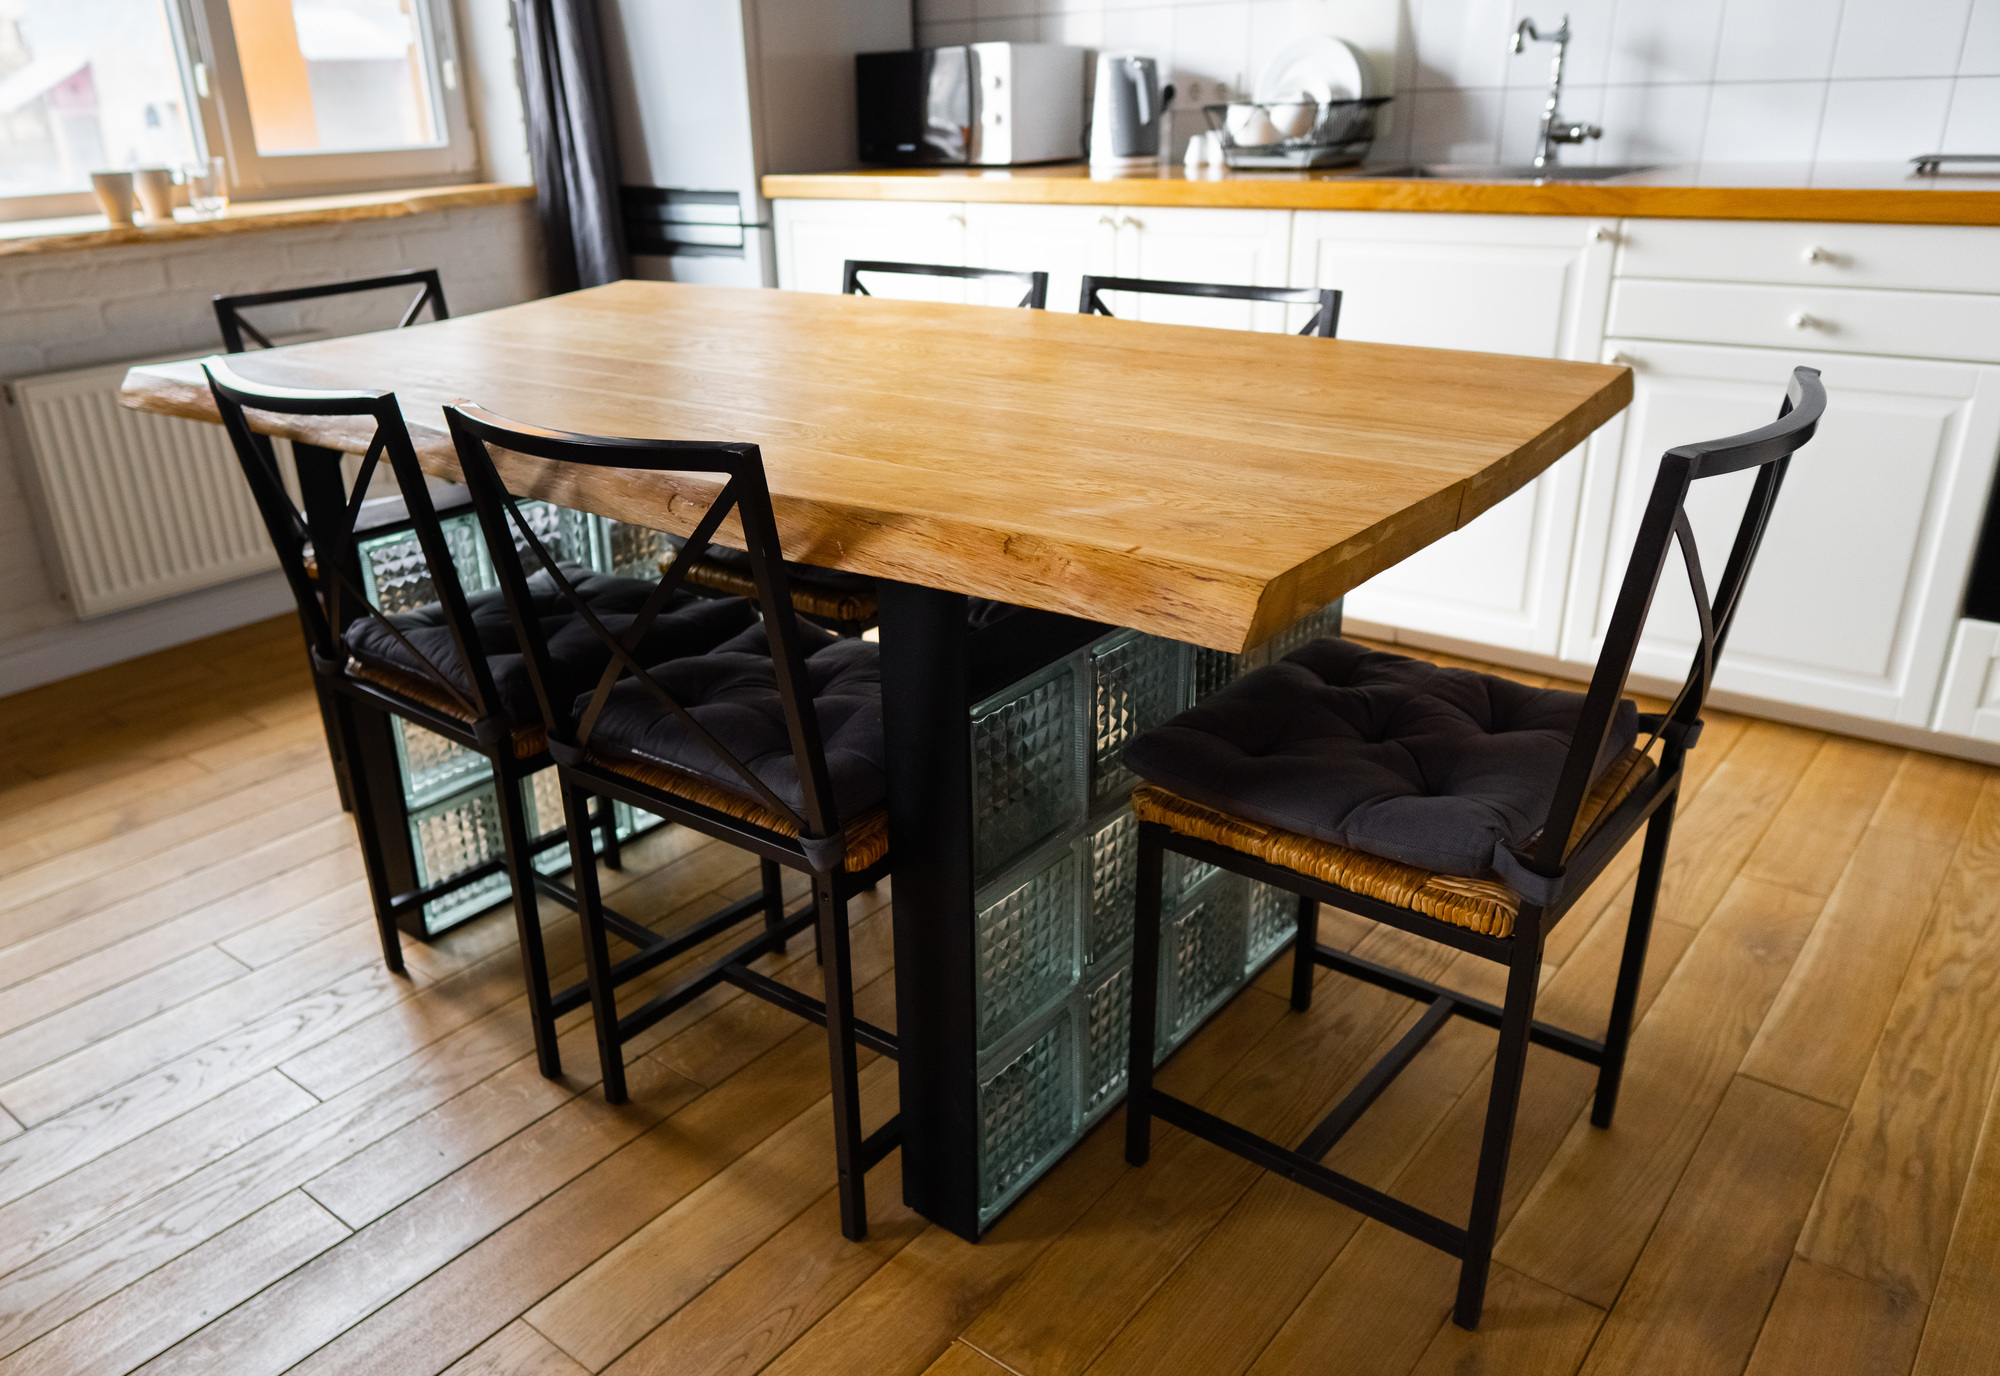 A big wooden dining table with glass blocks and metal wicker chairs and pillows in modern scandinavian an eat-in kitchen, against bright white furnitures, appliances and light wood floor